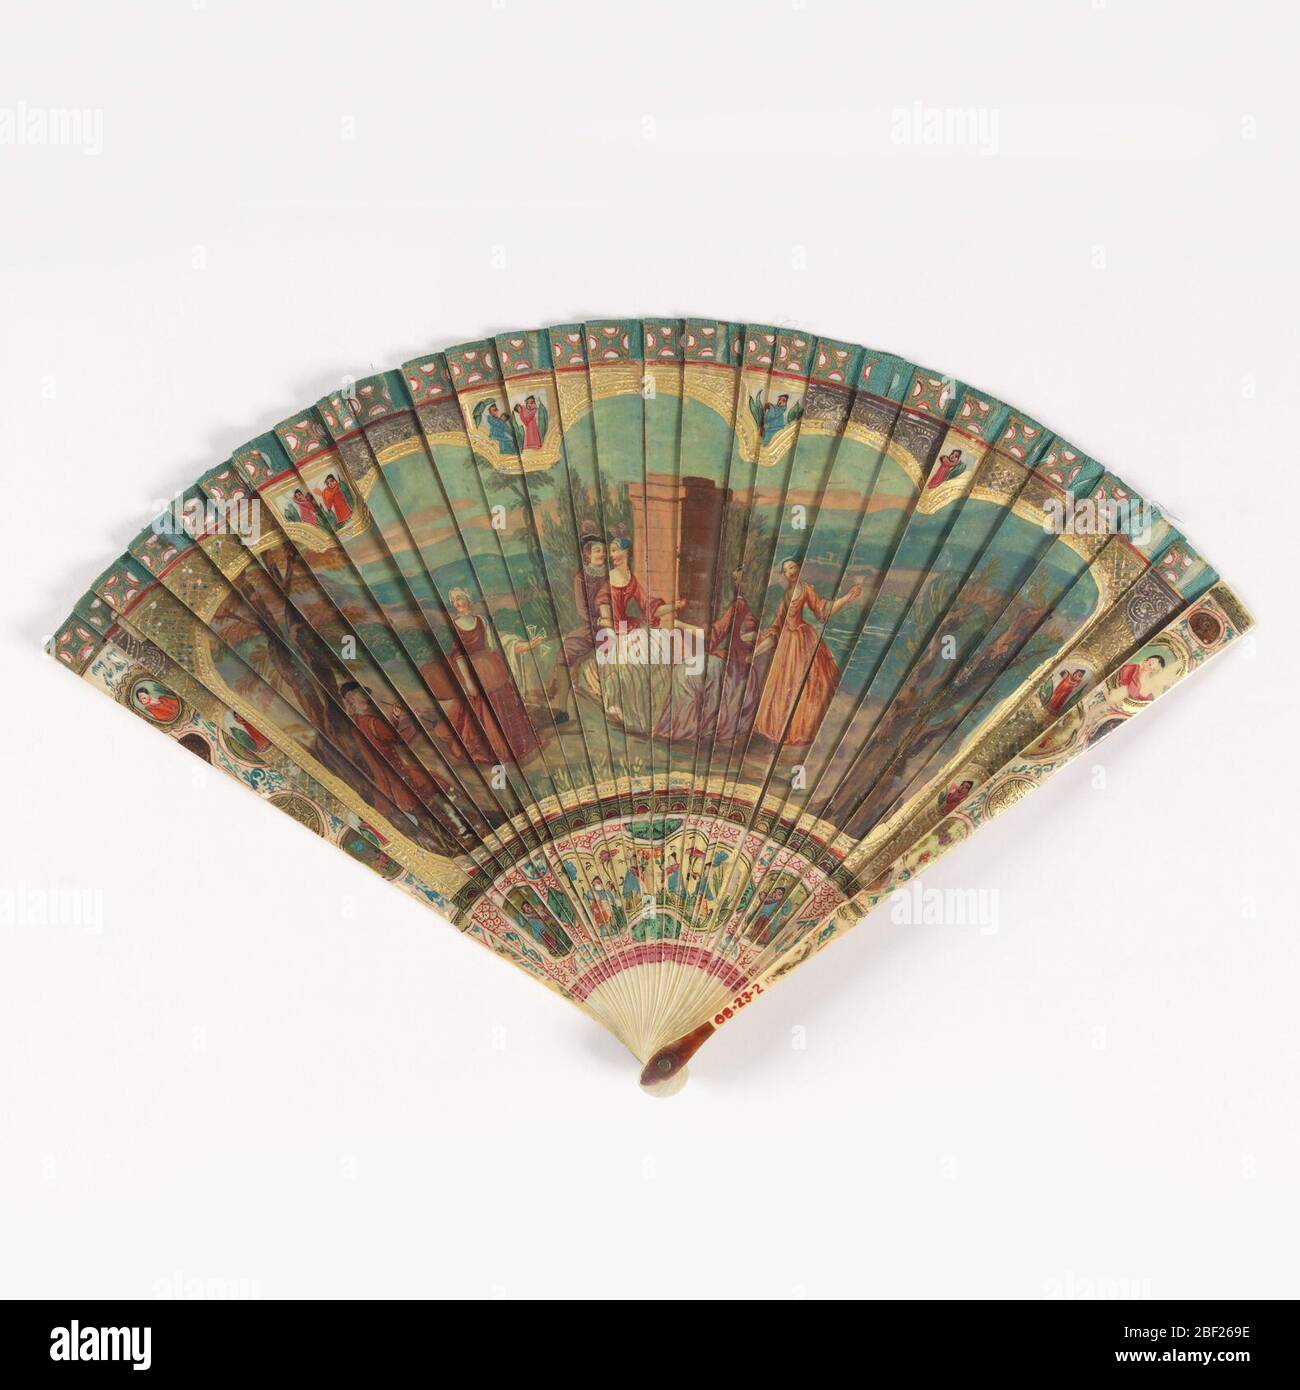 Bris fan. Fan with observe painted with a design of dancers and musicians against a landscape background. Reverse has a landscape scene with trees against a hilly backdrop. In margins are birds and figures in a chinoiserie style. Stock Photo